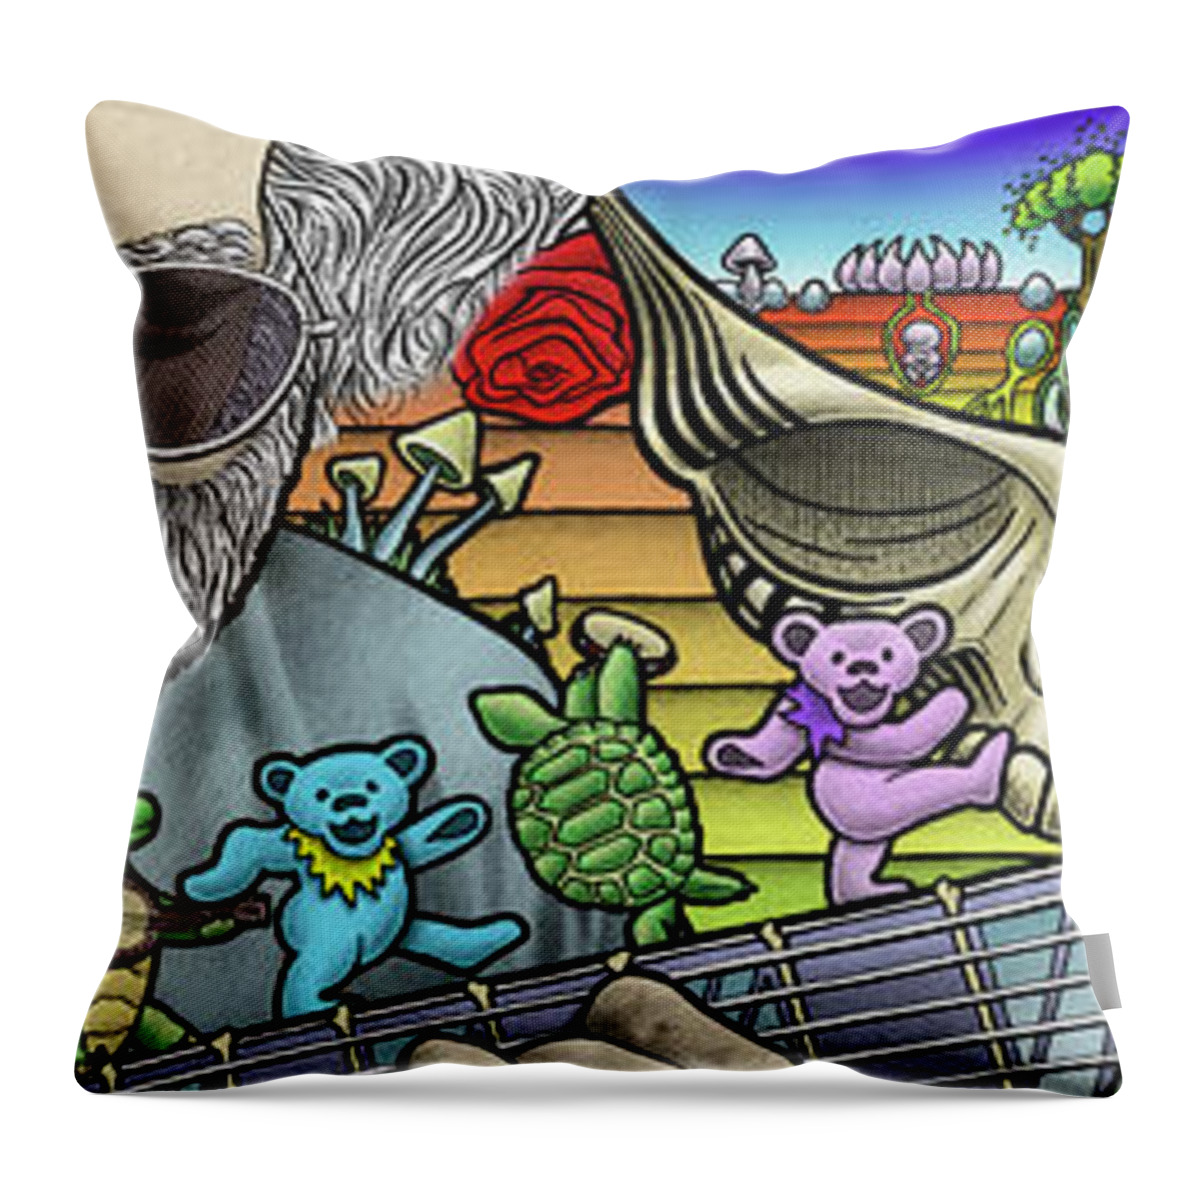 Grateful Dead Throw Pillow featuring the drawing Grateful Dead by Jeffrey St Romain